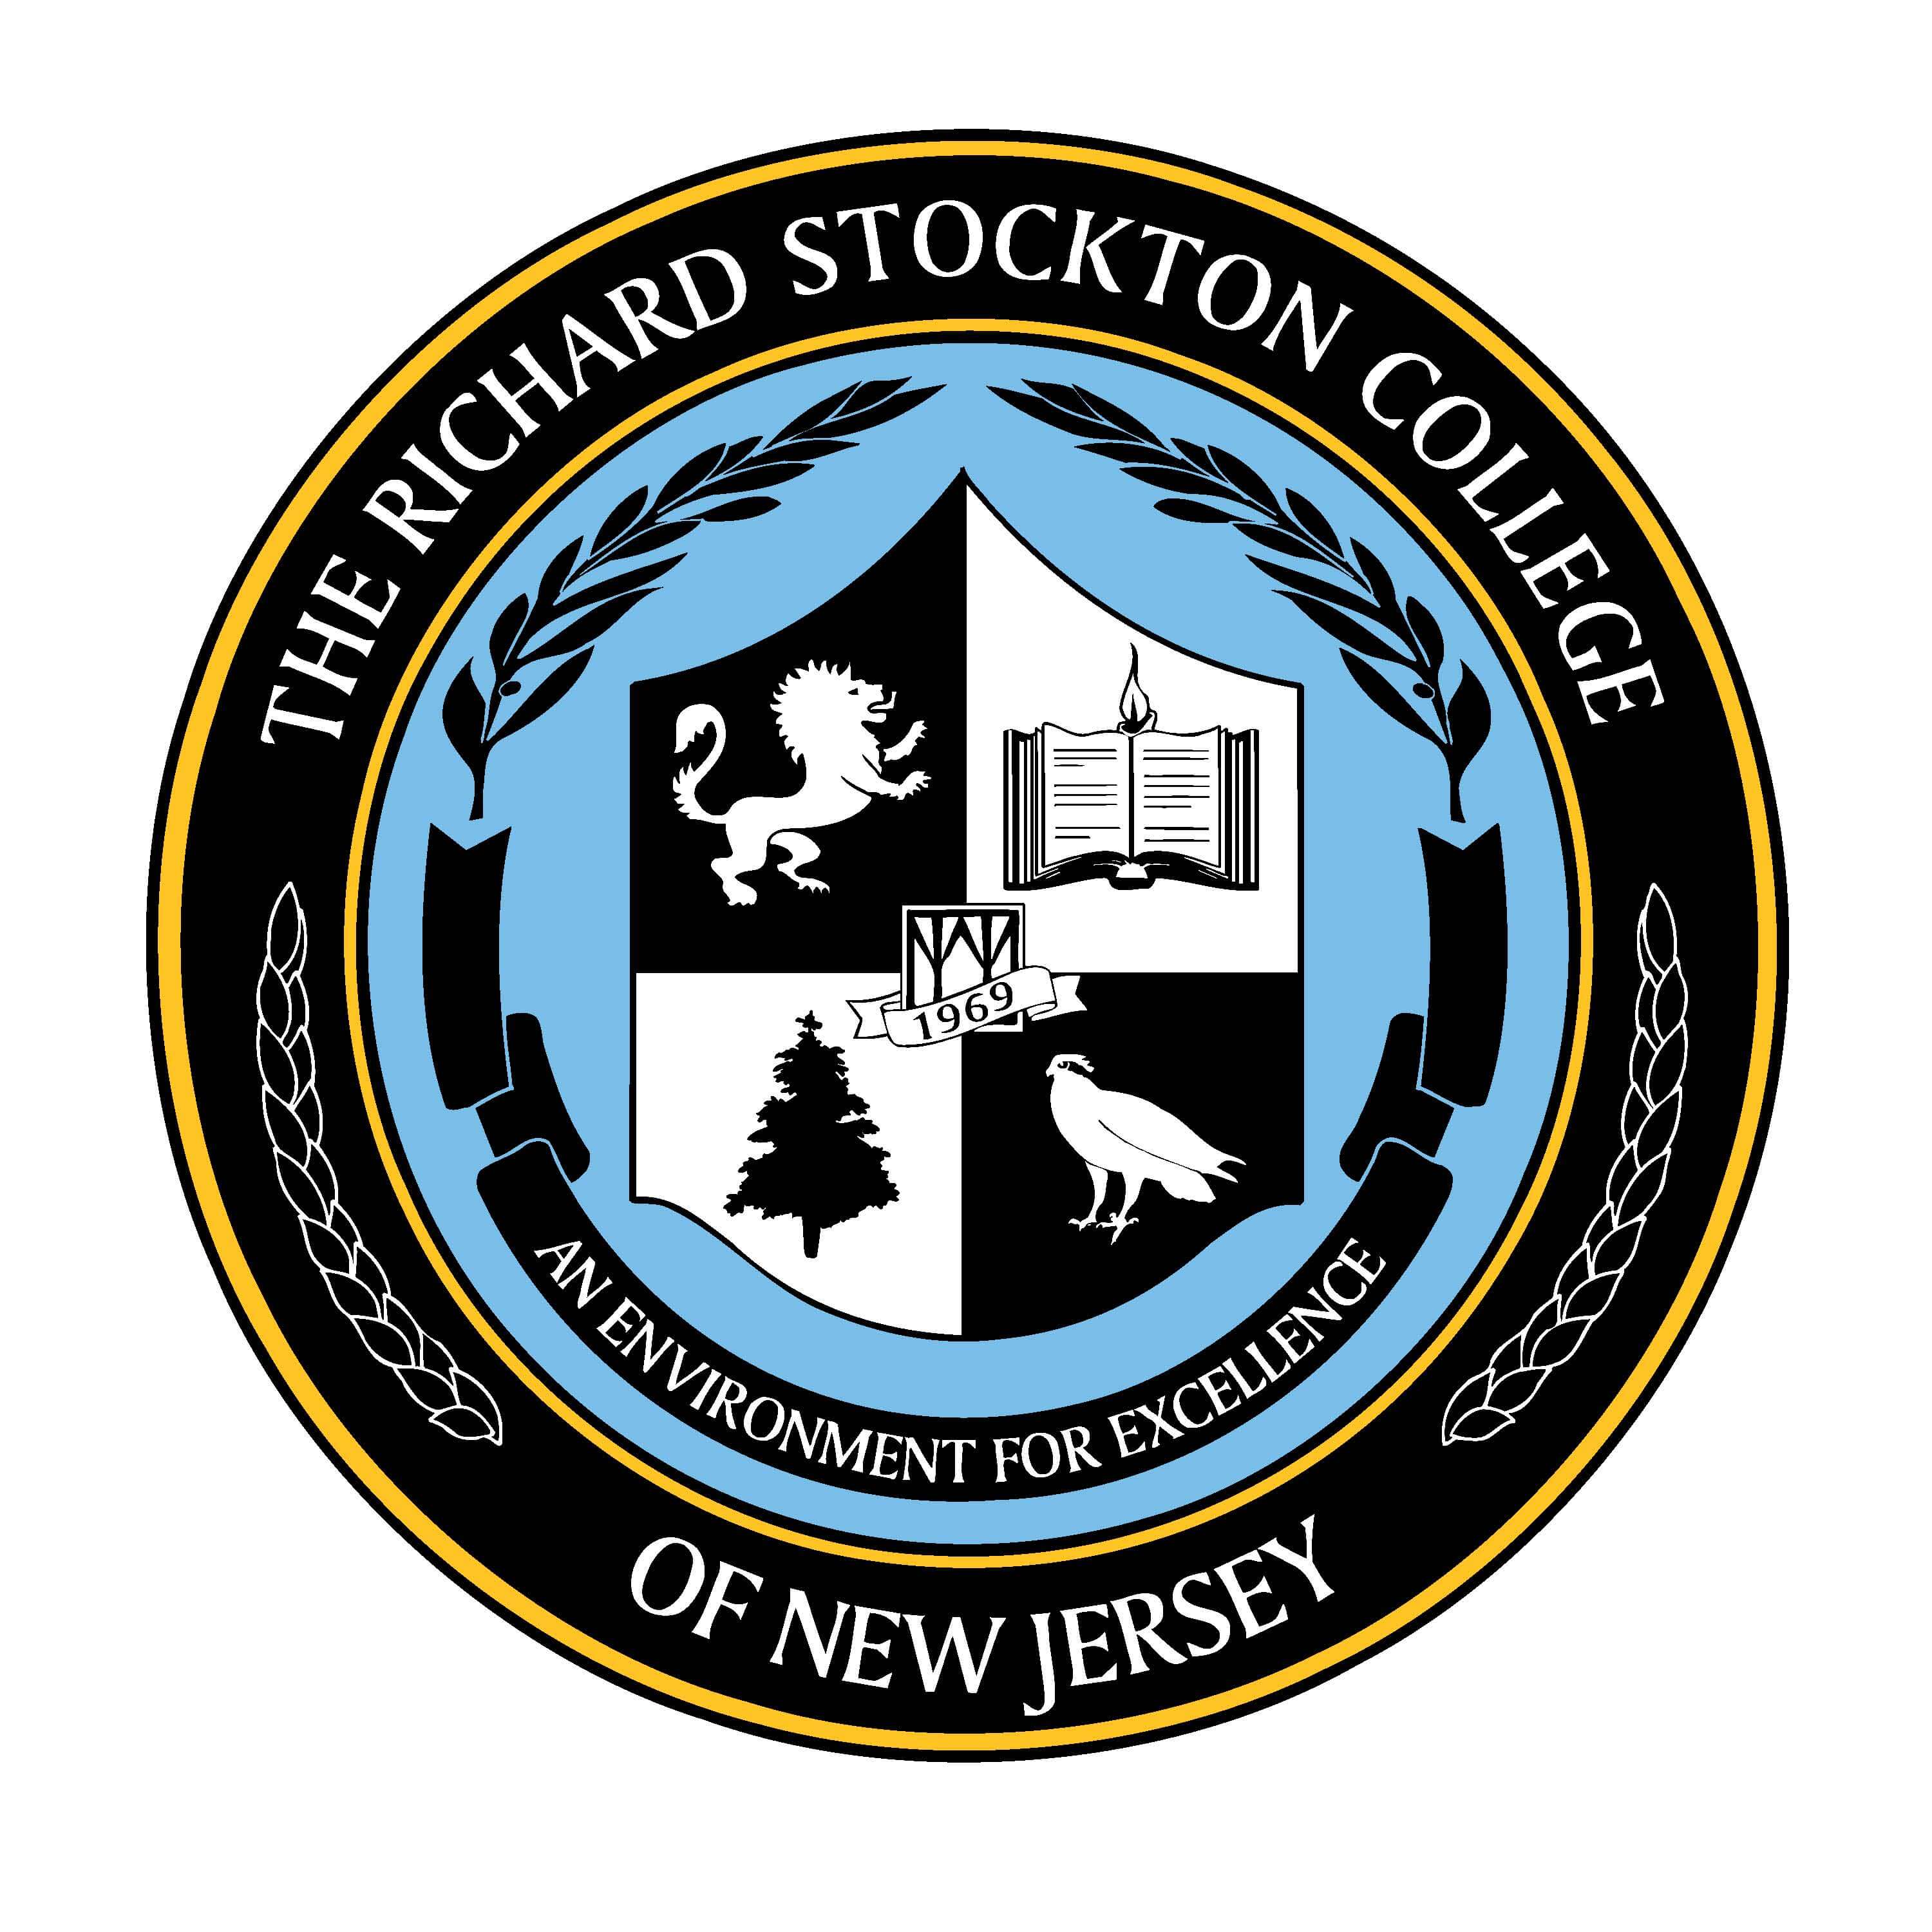 Richard Stockton College of New Jersey - Social Work Degrees,  Accreditation, Applying, Tuition, Financial Aid